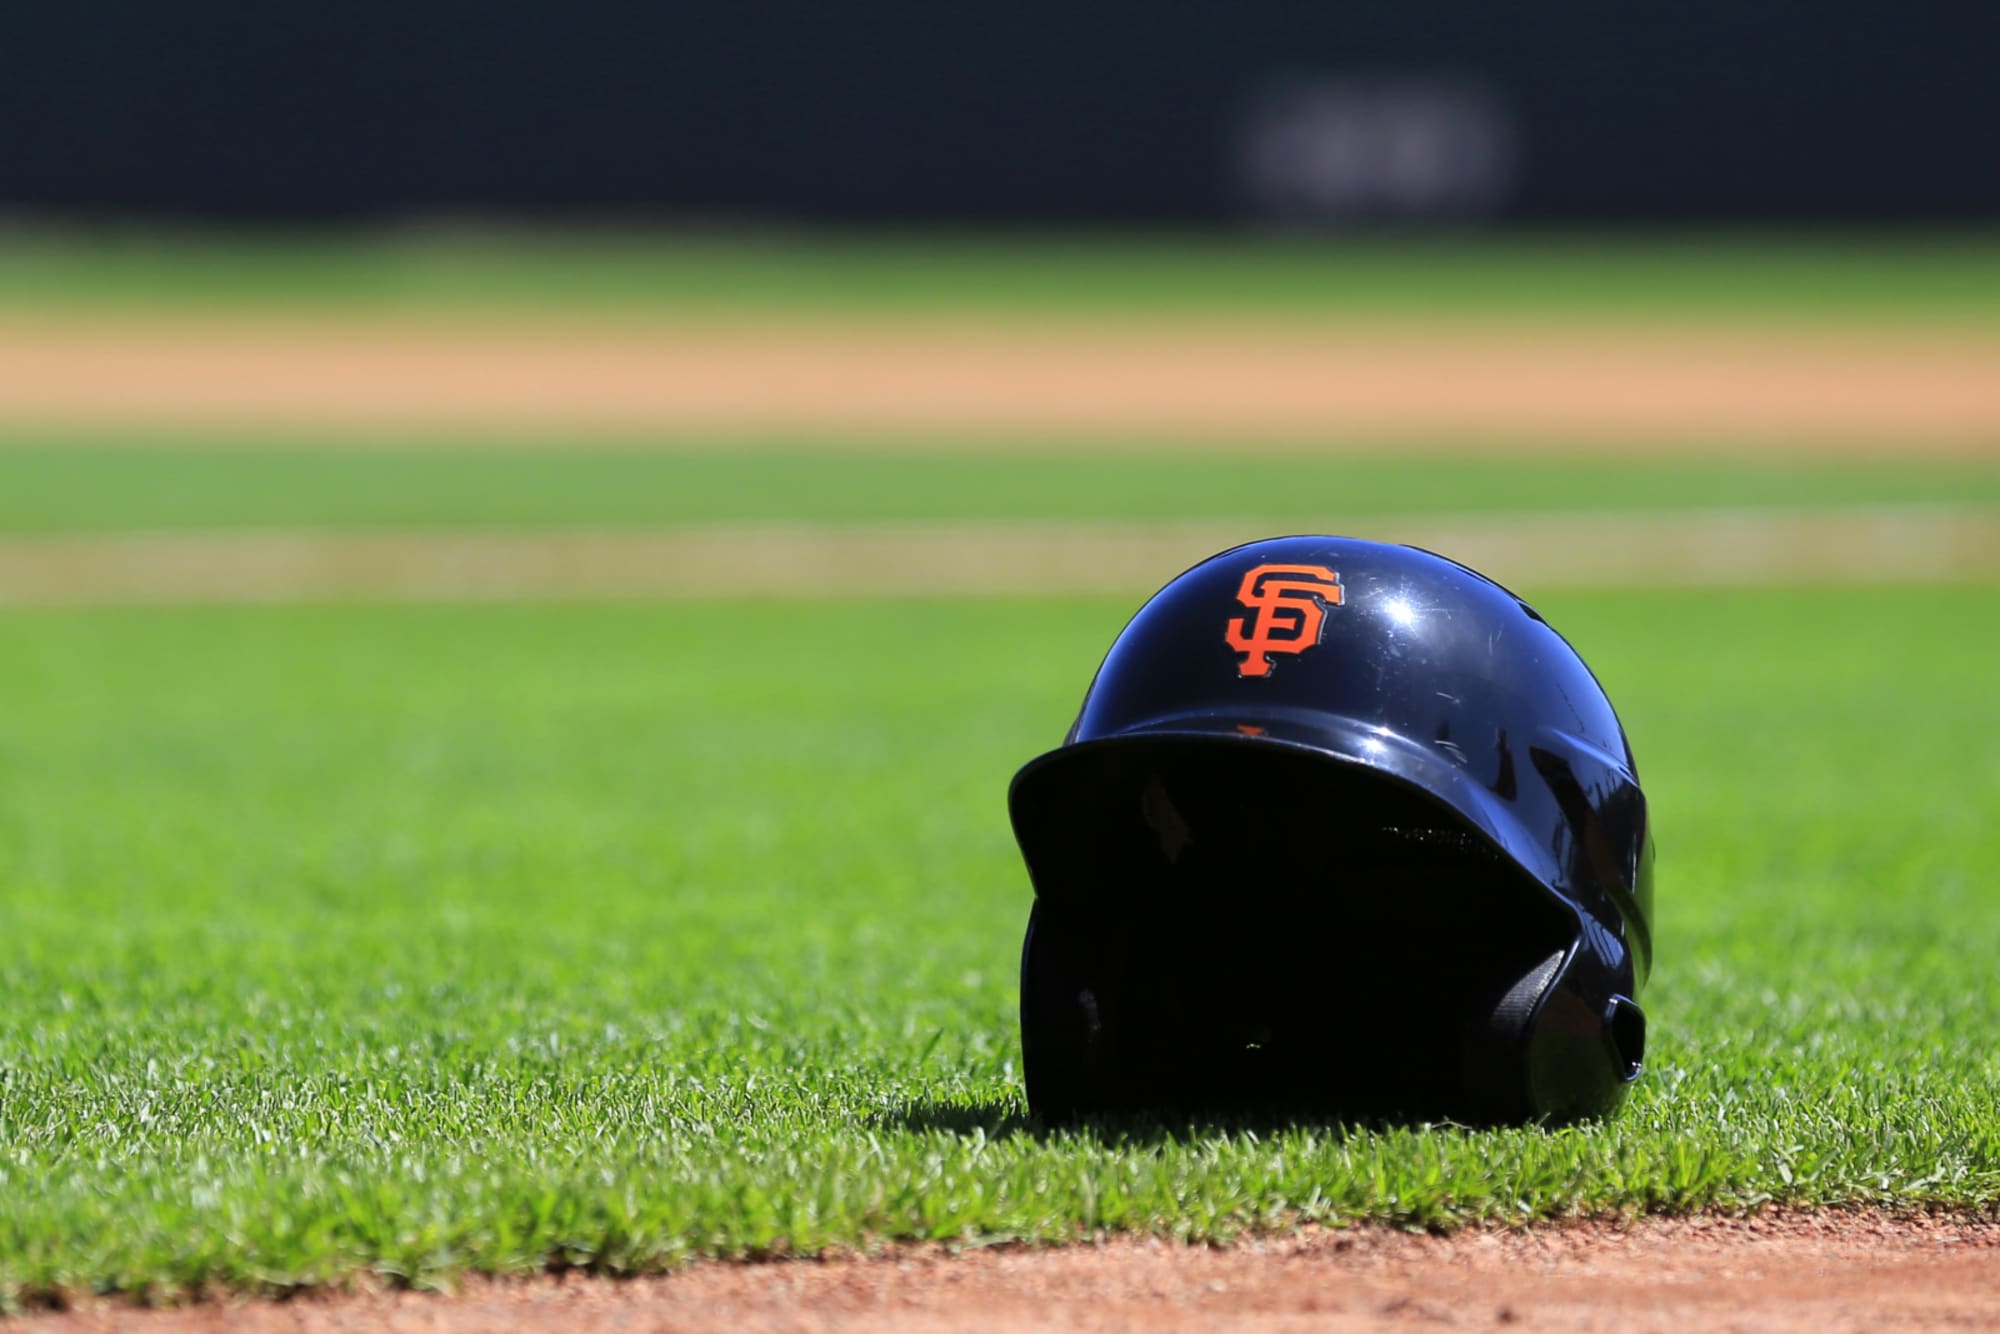 Giants listed as fifth-most valuable MLB team, Forbes says